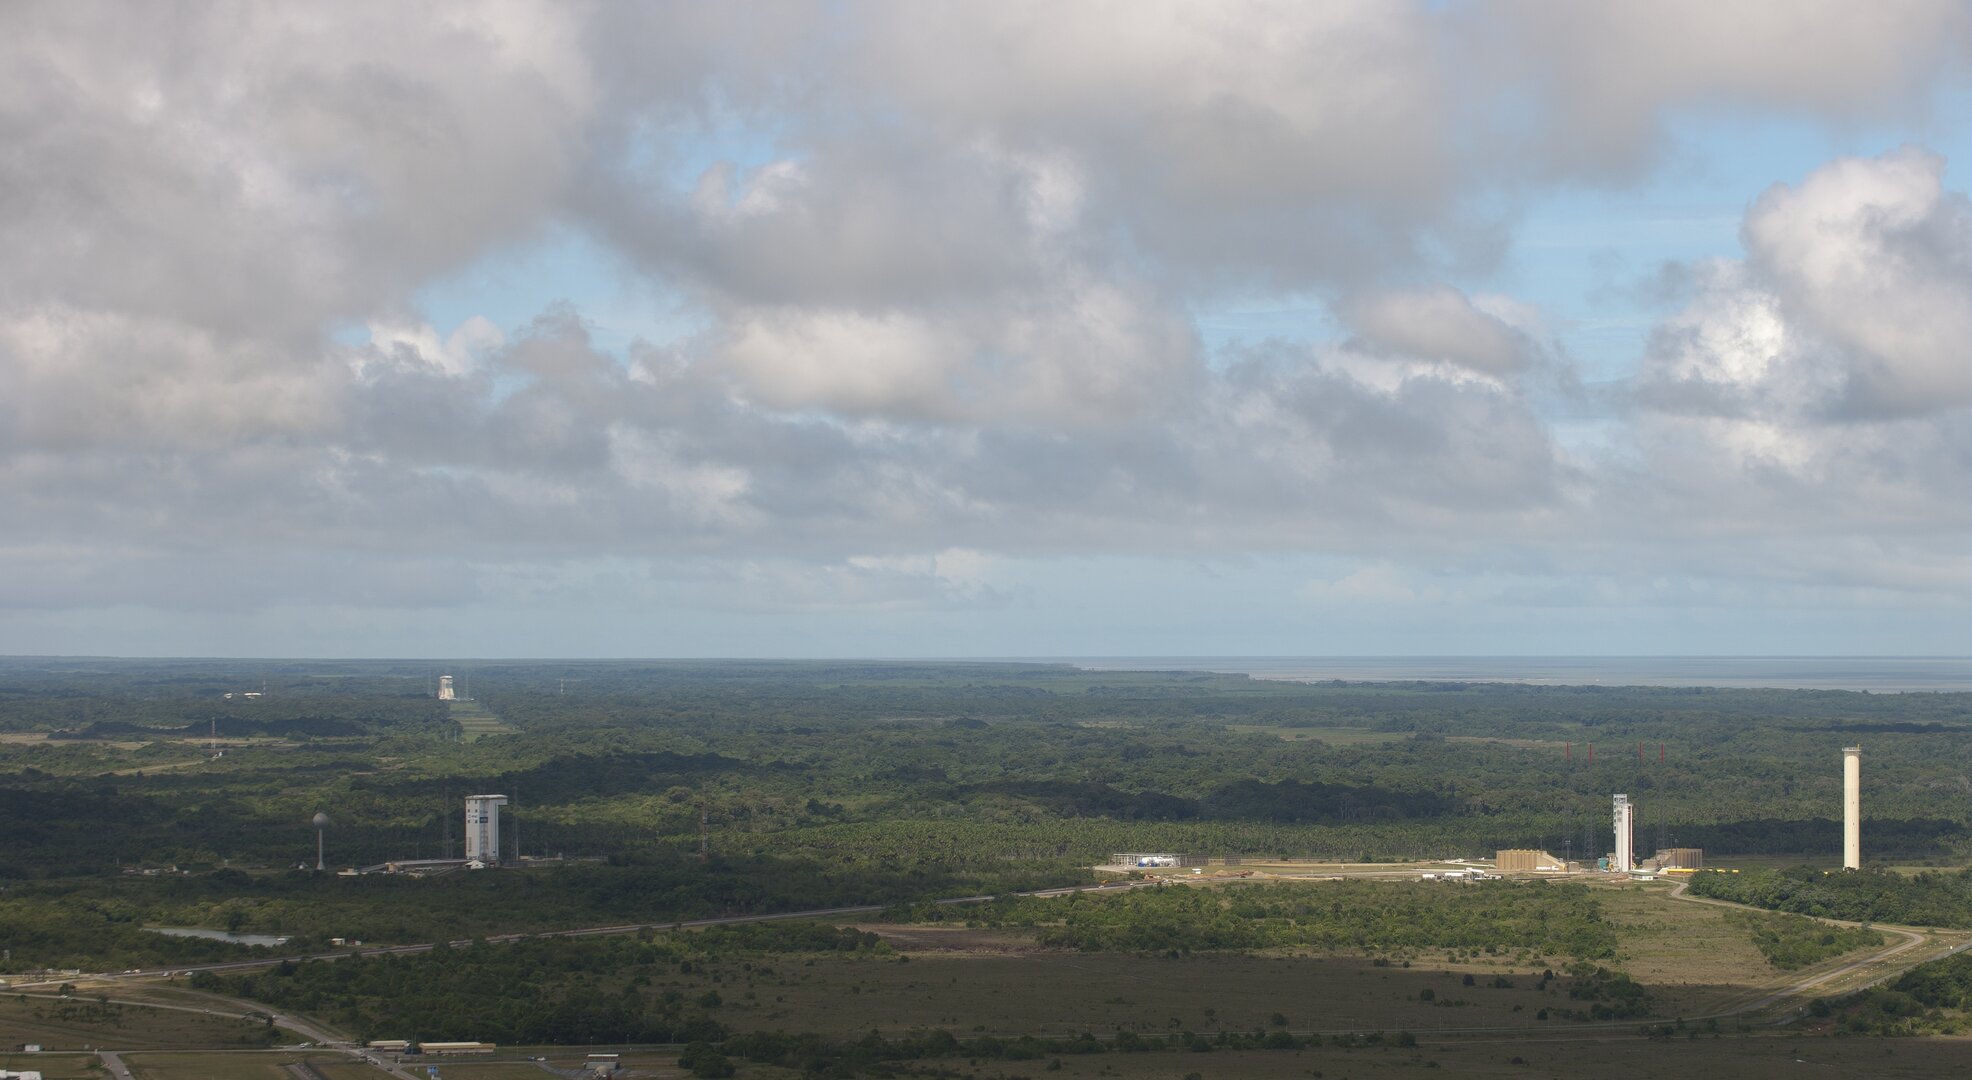 Three launch pads at Europe’s Spaceport